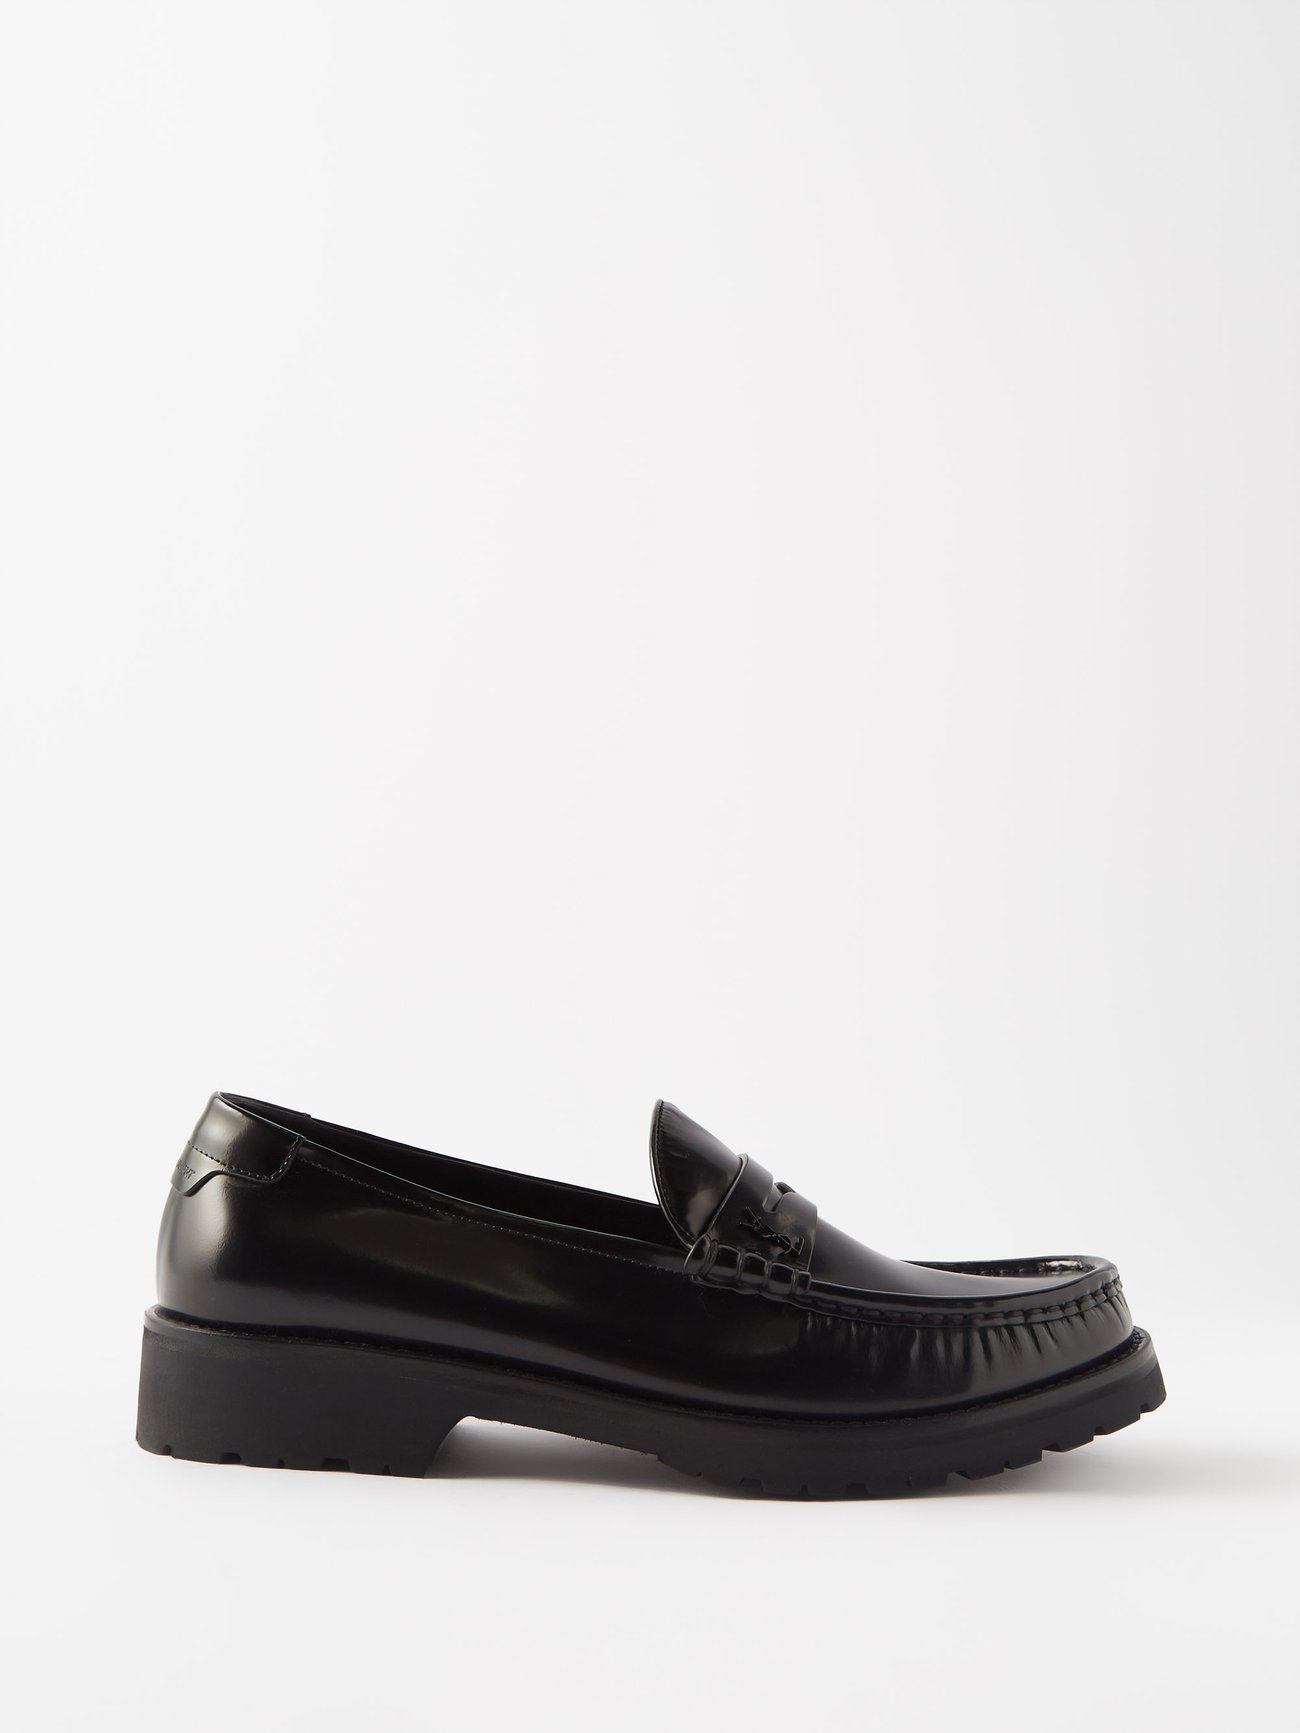 Arizona Moccasins - Luxury Loafers and Moccasins - Shoes